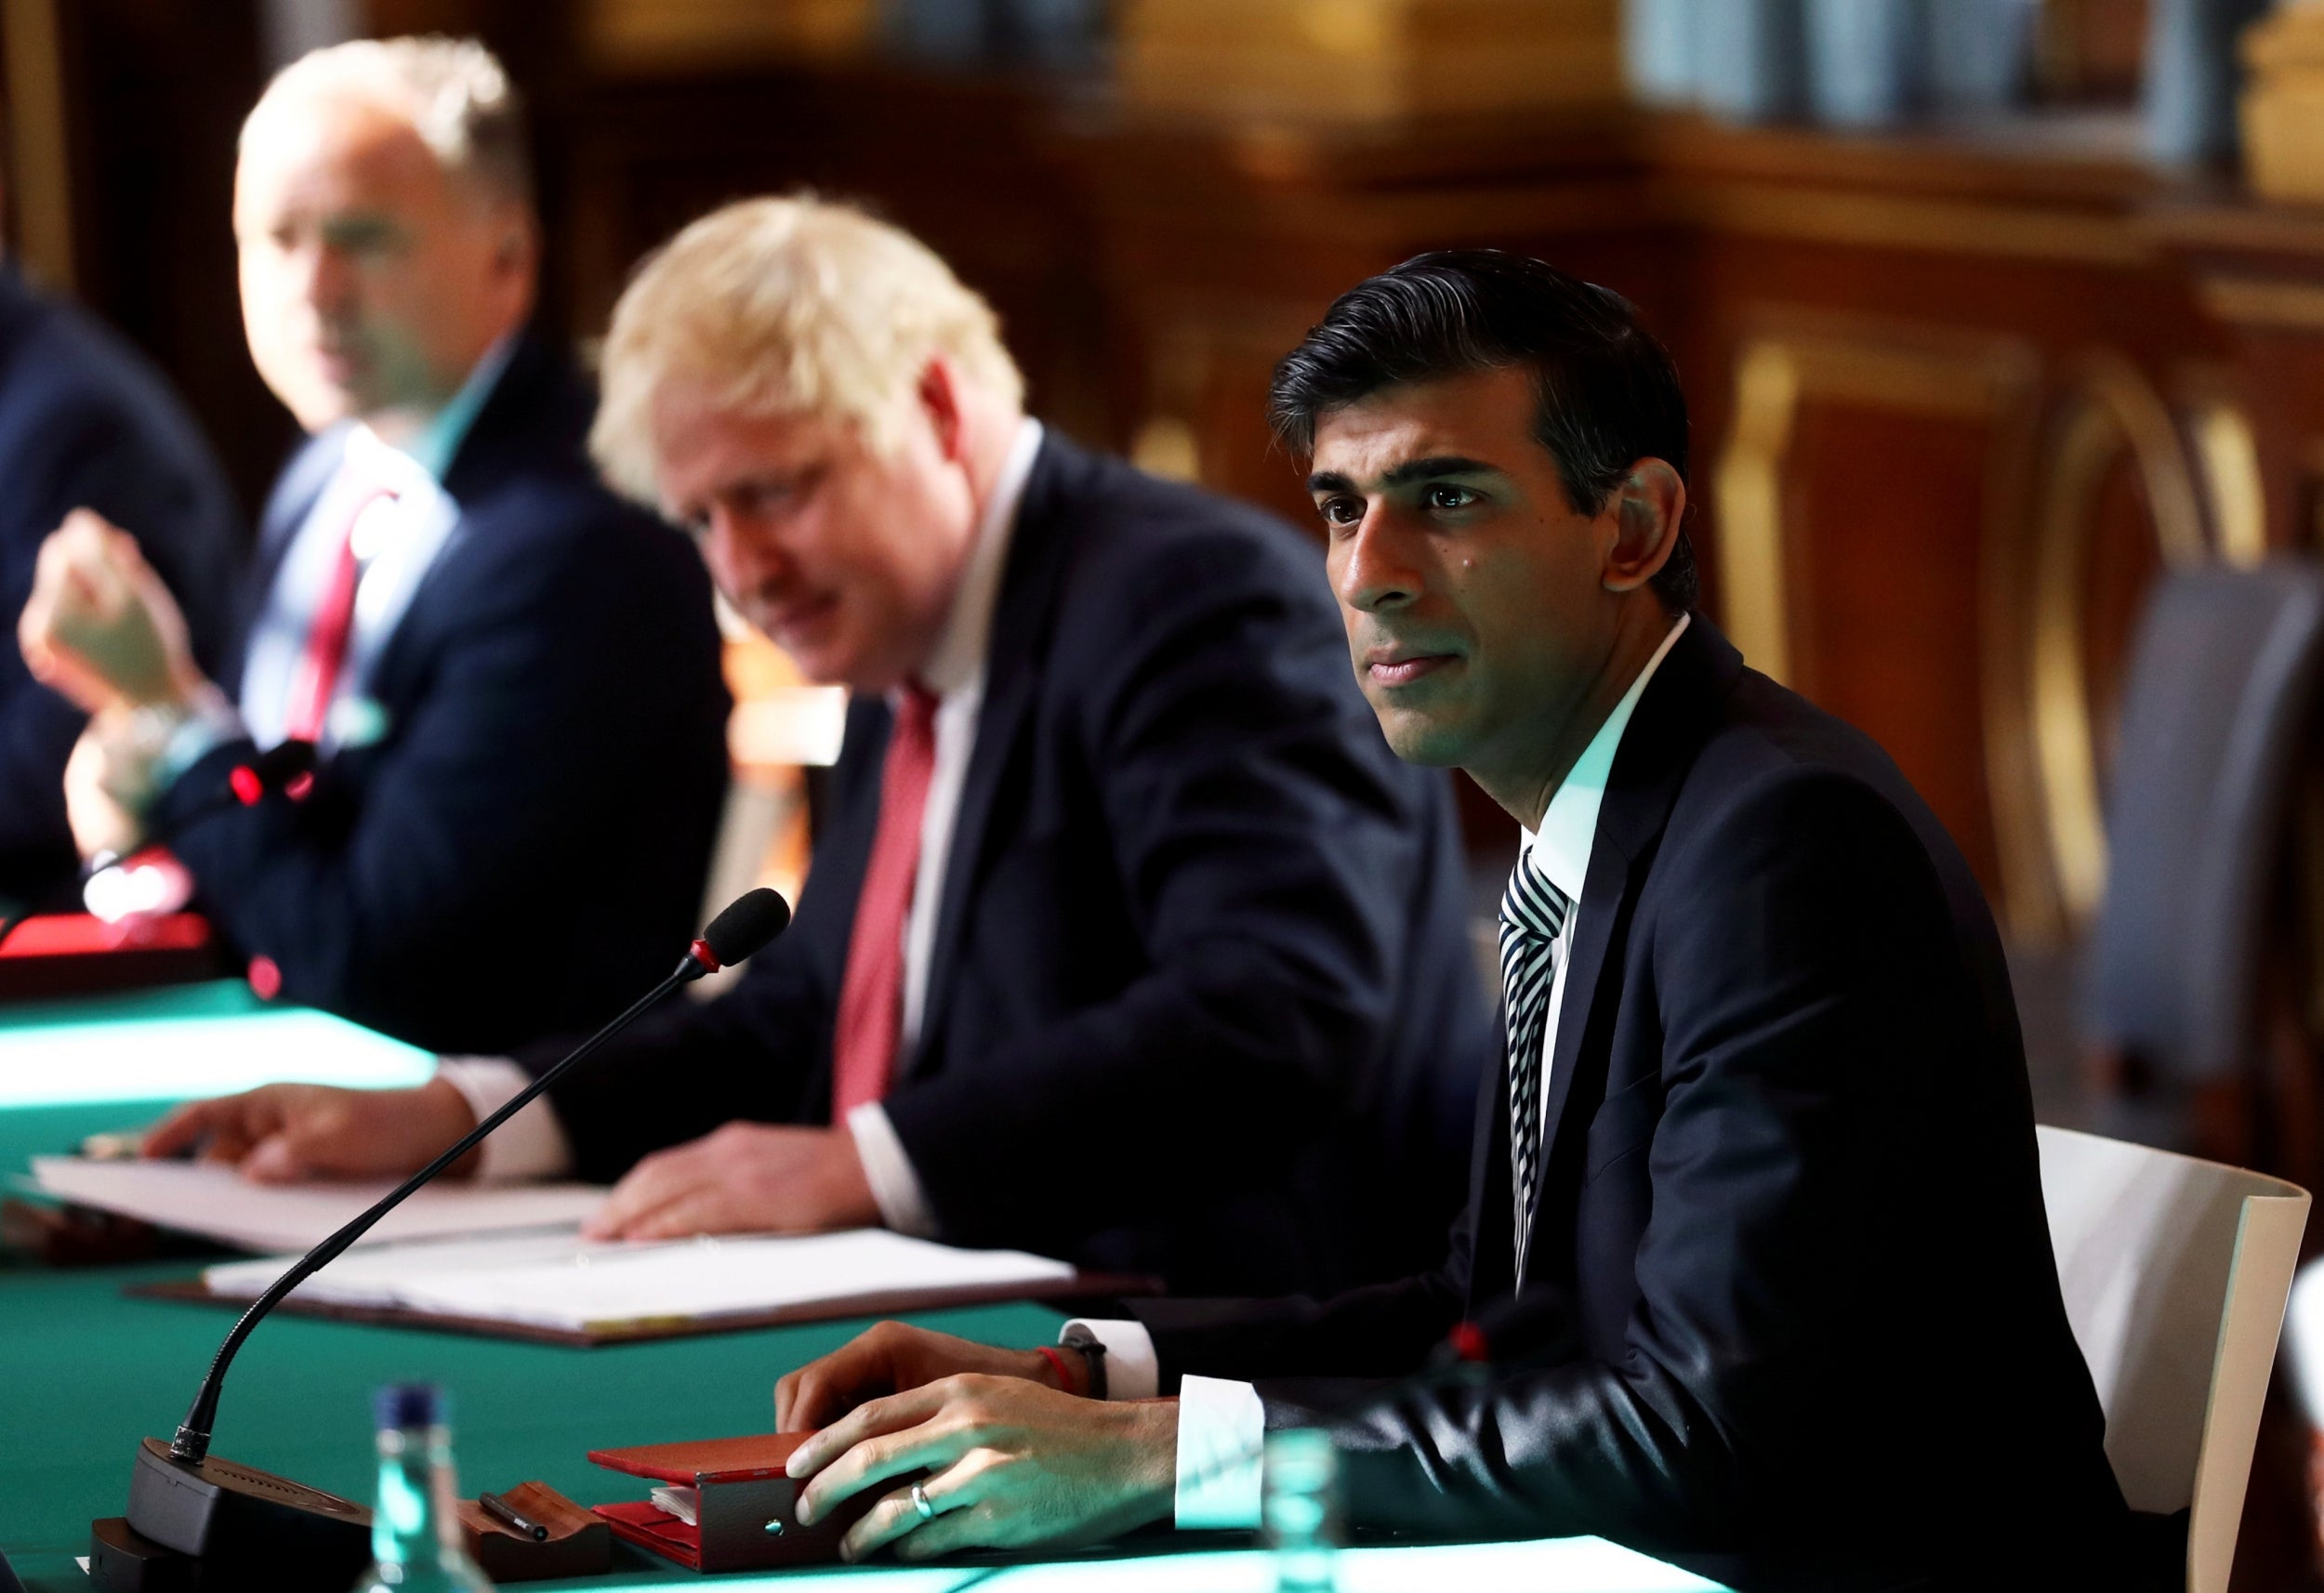 Chancellor Rishi Sunak faces a delicate balancing act – pressure for higher spending, with a smaller economy